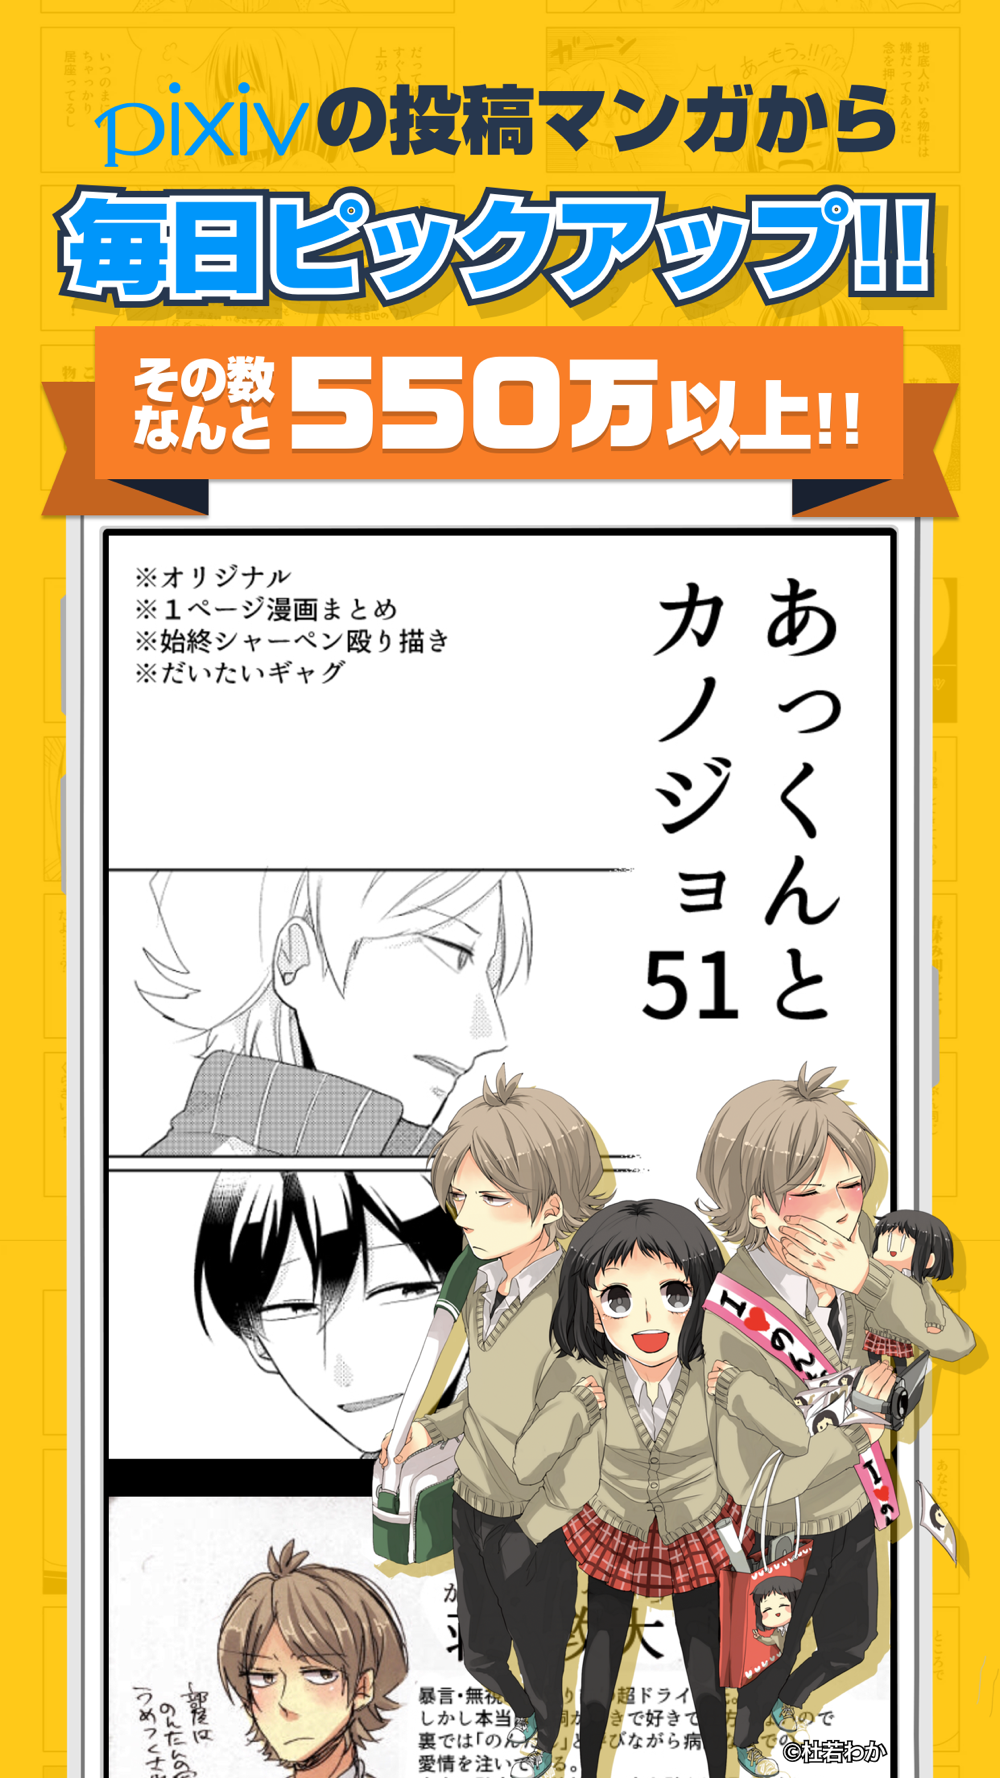 Pixivコミック マンガ読み放題の漫画アプリ Free Download App For Iphone Steprimo Com